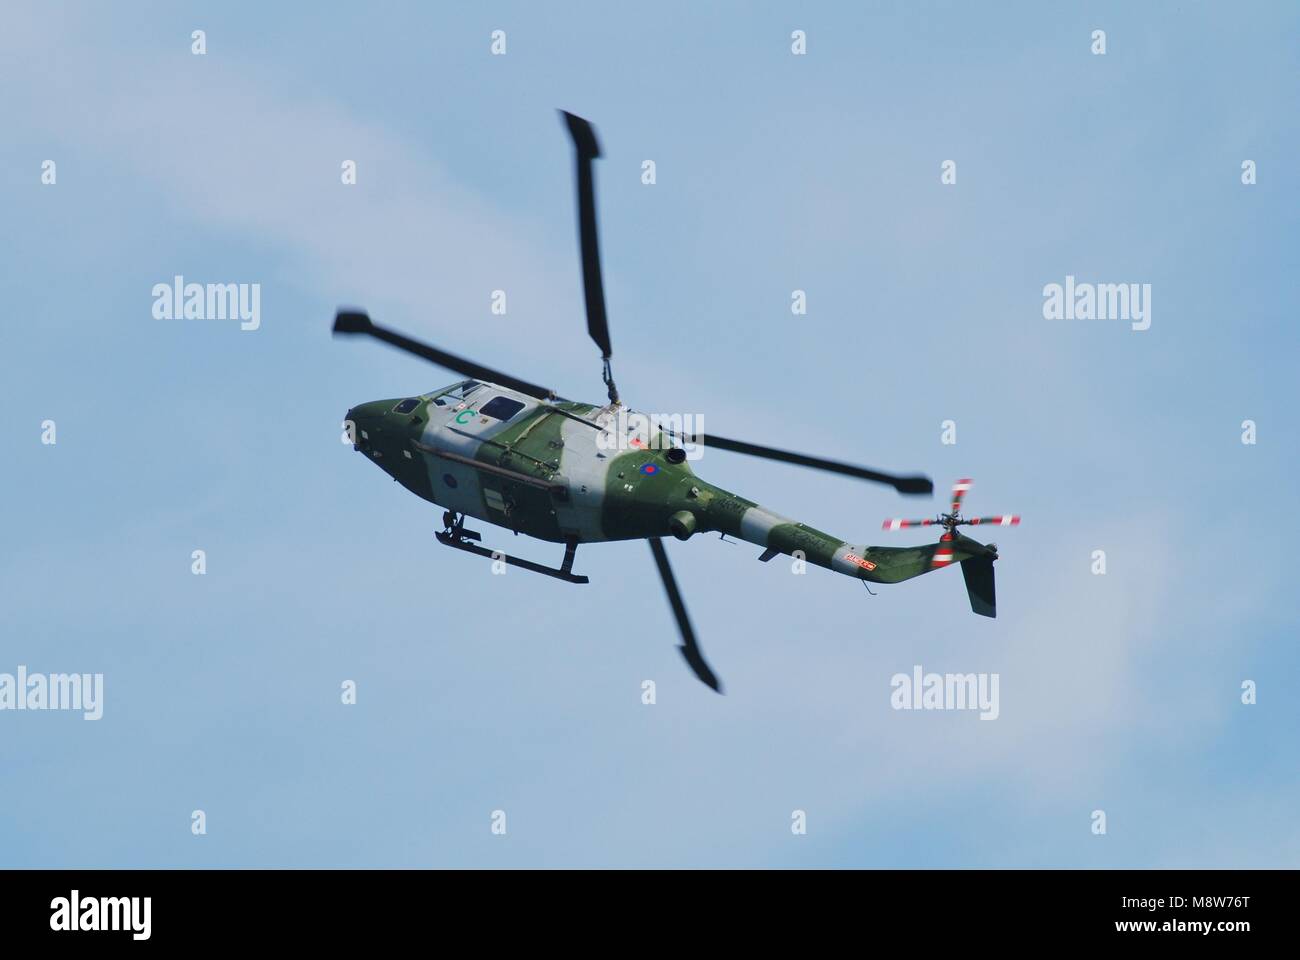 Un Westland Lynx AH.7 elicottero del British Army Air Corps (AAC) esegue all'Airshow Airbourne a Eastbourne, in Inghilterra il 11 agosto 2012. Foto Stock